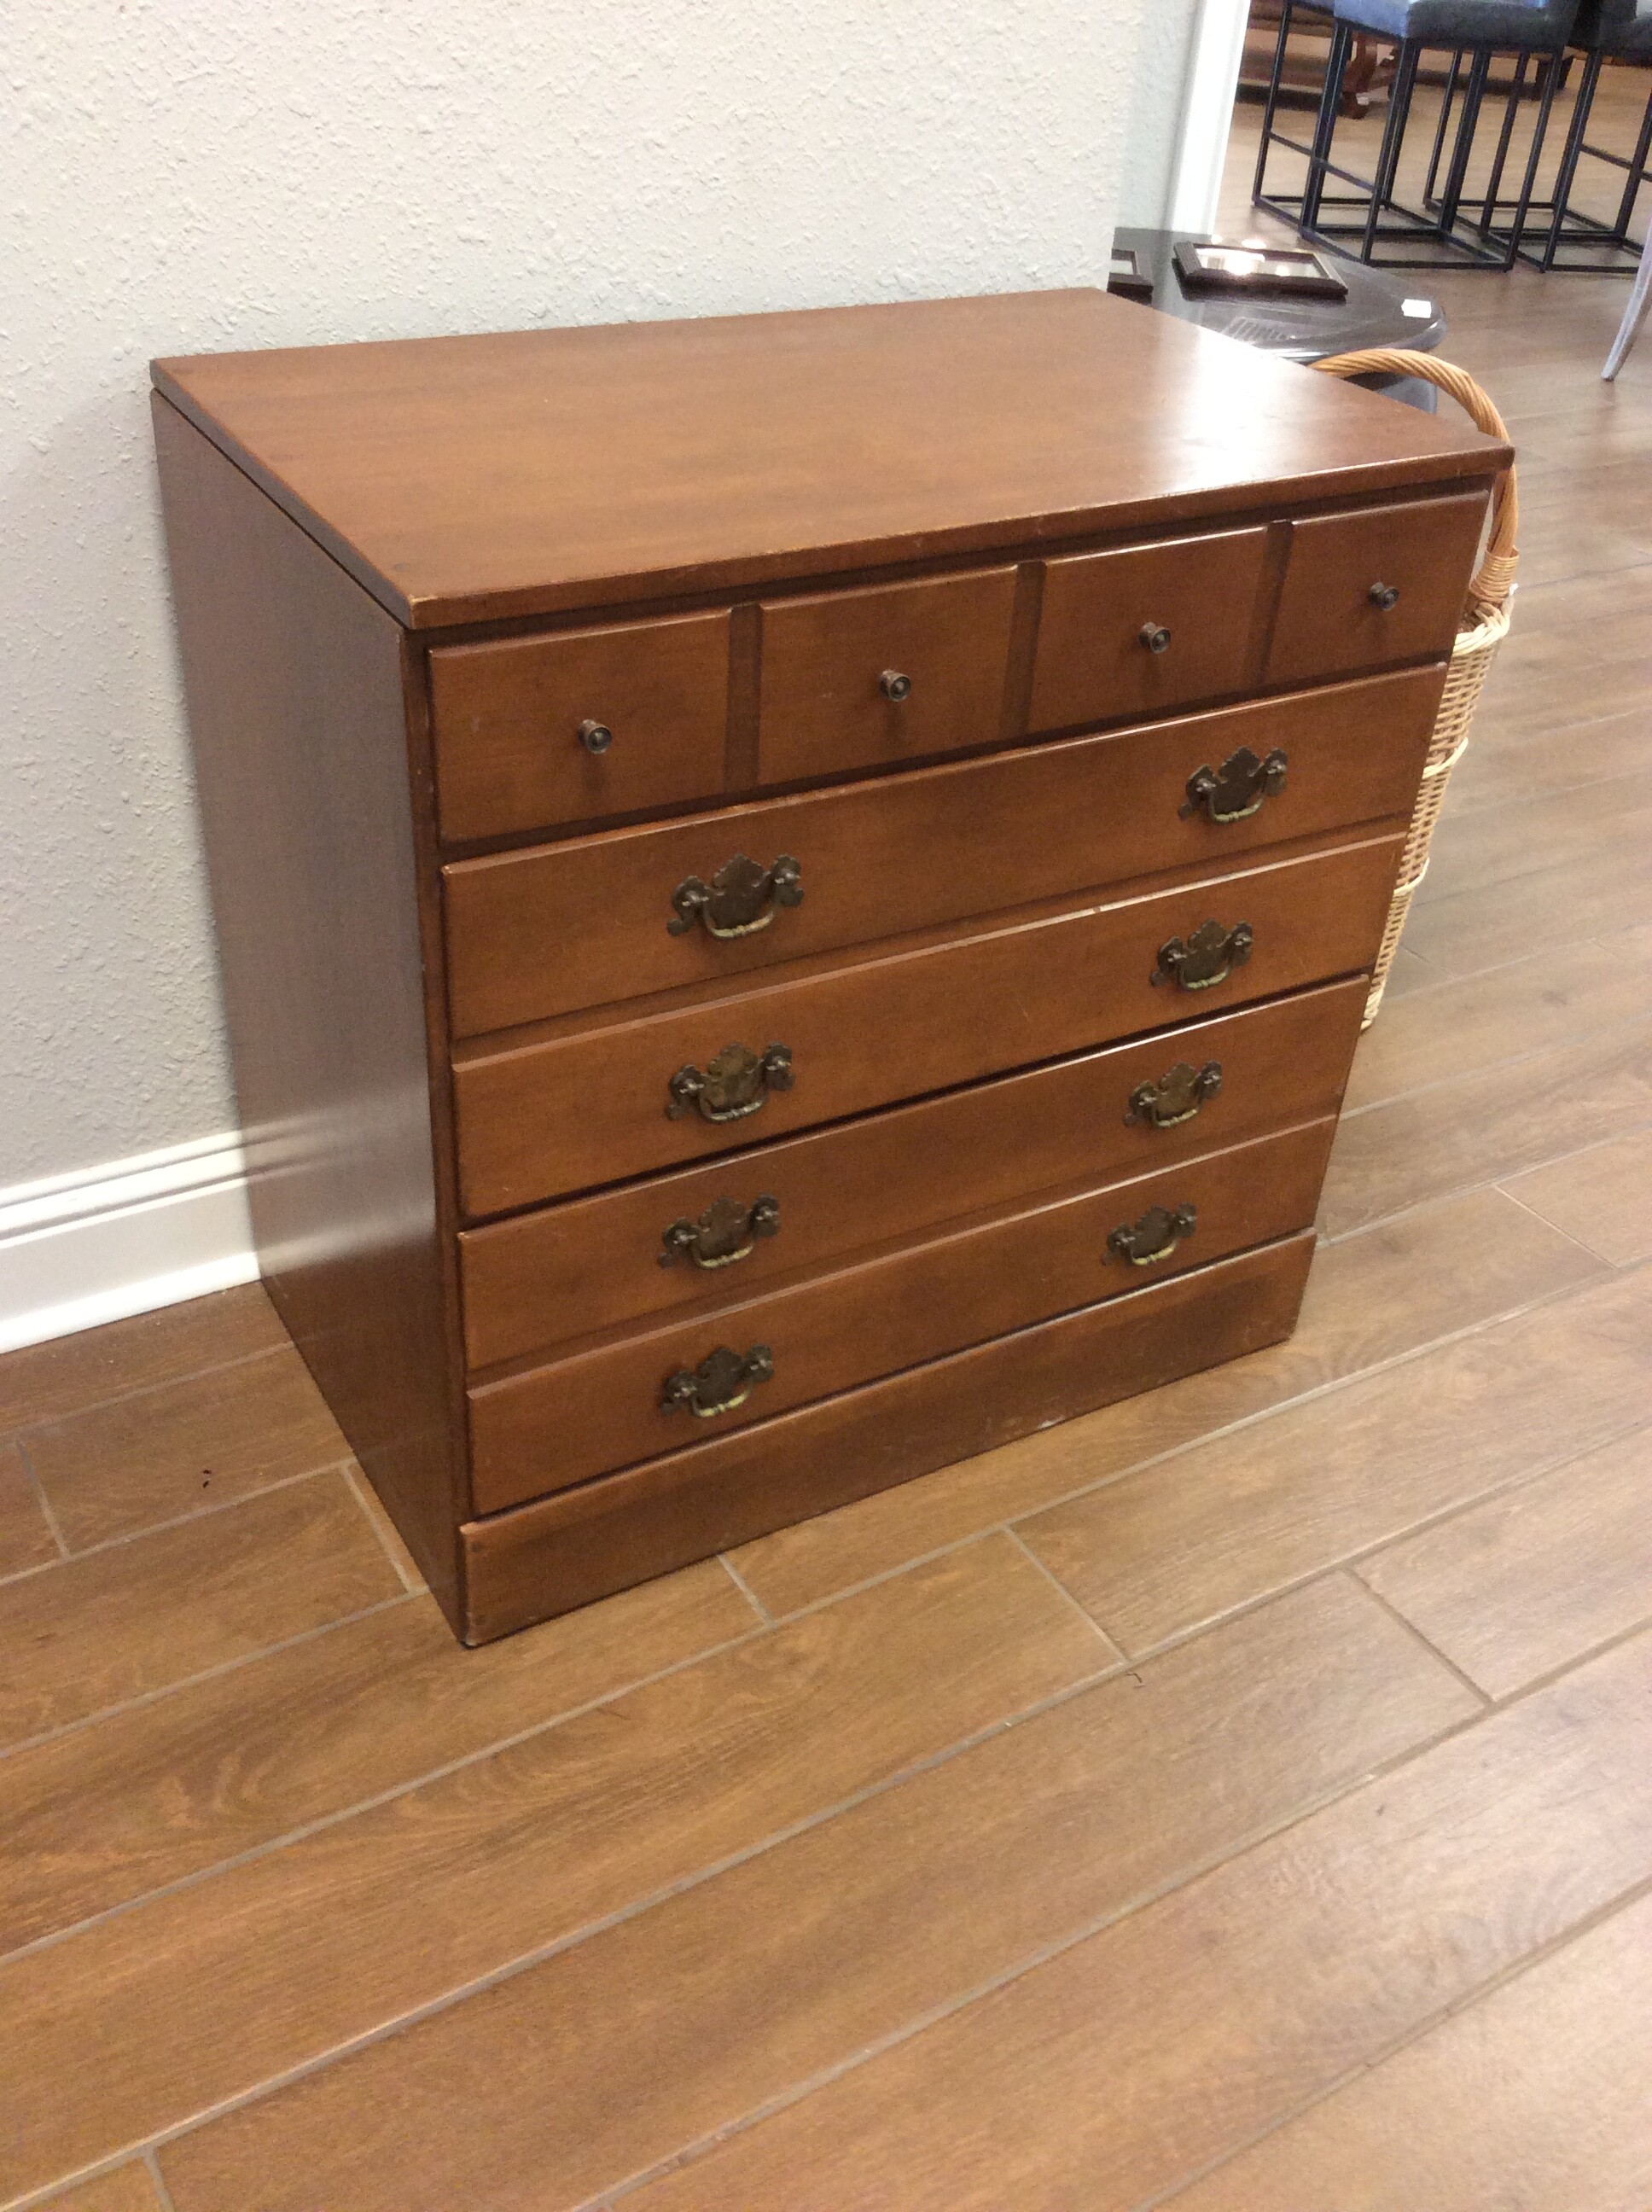 This is a very nice, light wood, 3 drawer Ethan Allen Chest.